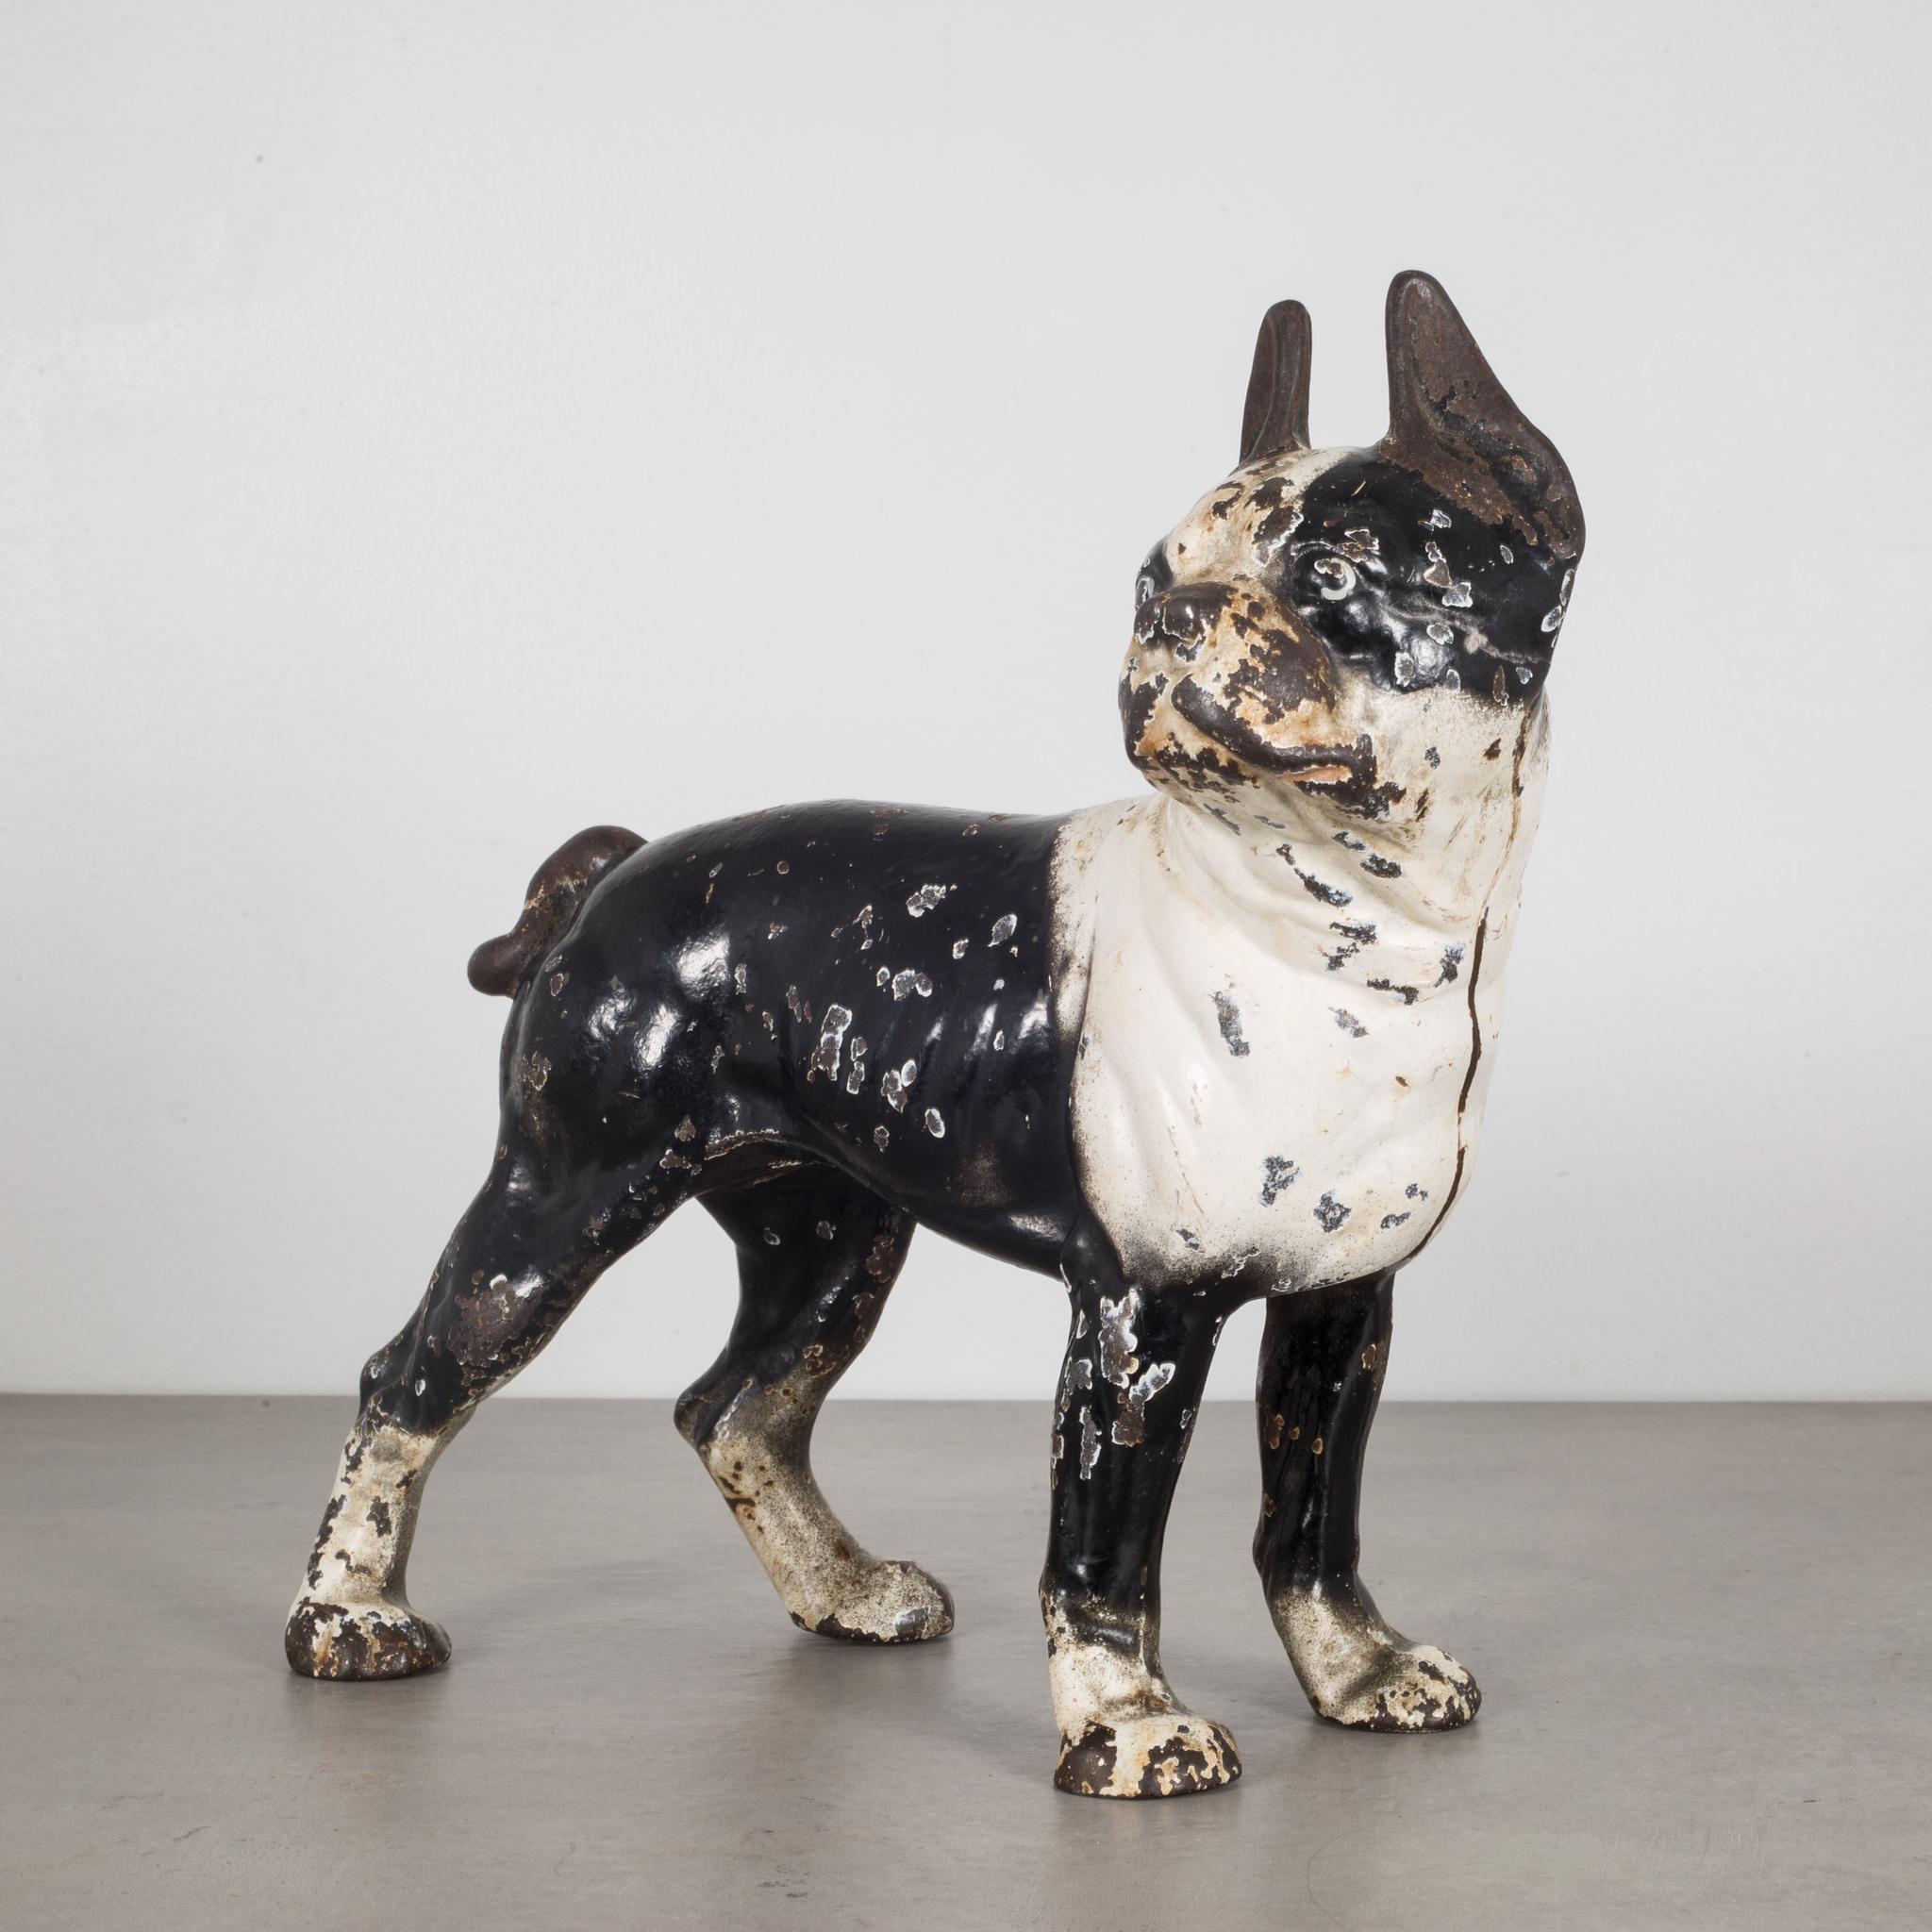 About

This is an original cast iron Boston Terrier doorstop manufactured by the Hubley Manufacturing Company in Lancaster Pennsylvania USA. The piece has retained its original hand painted finish and is in excellent condition with the appropriate